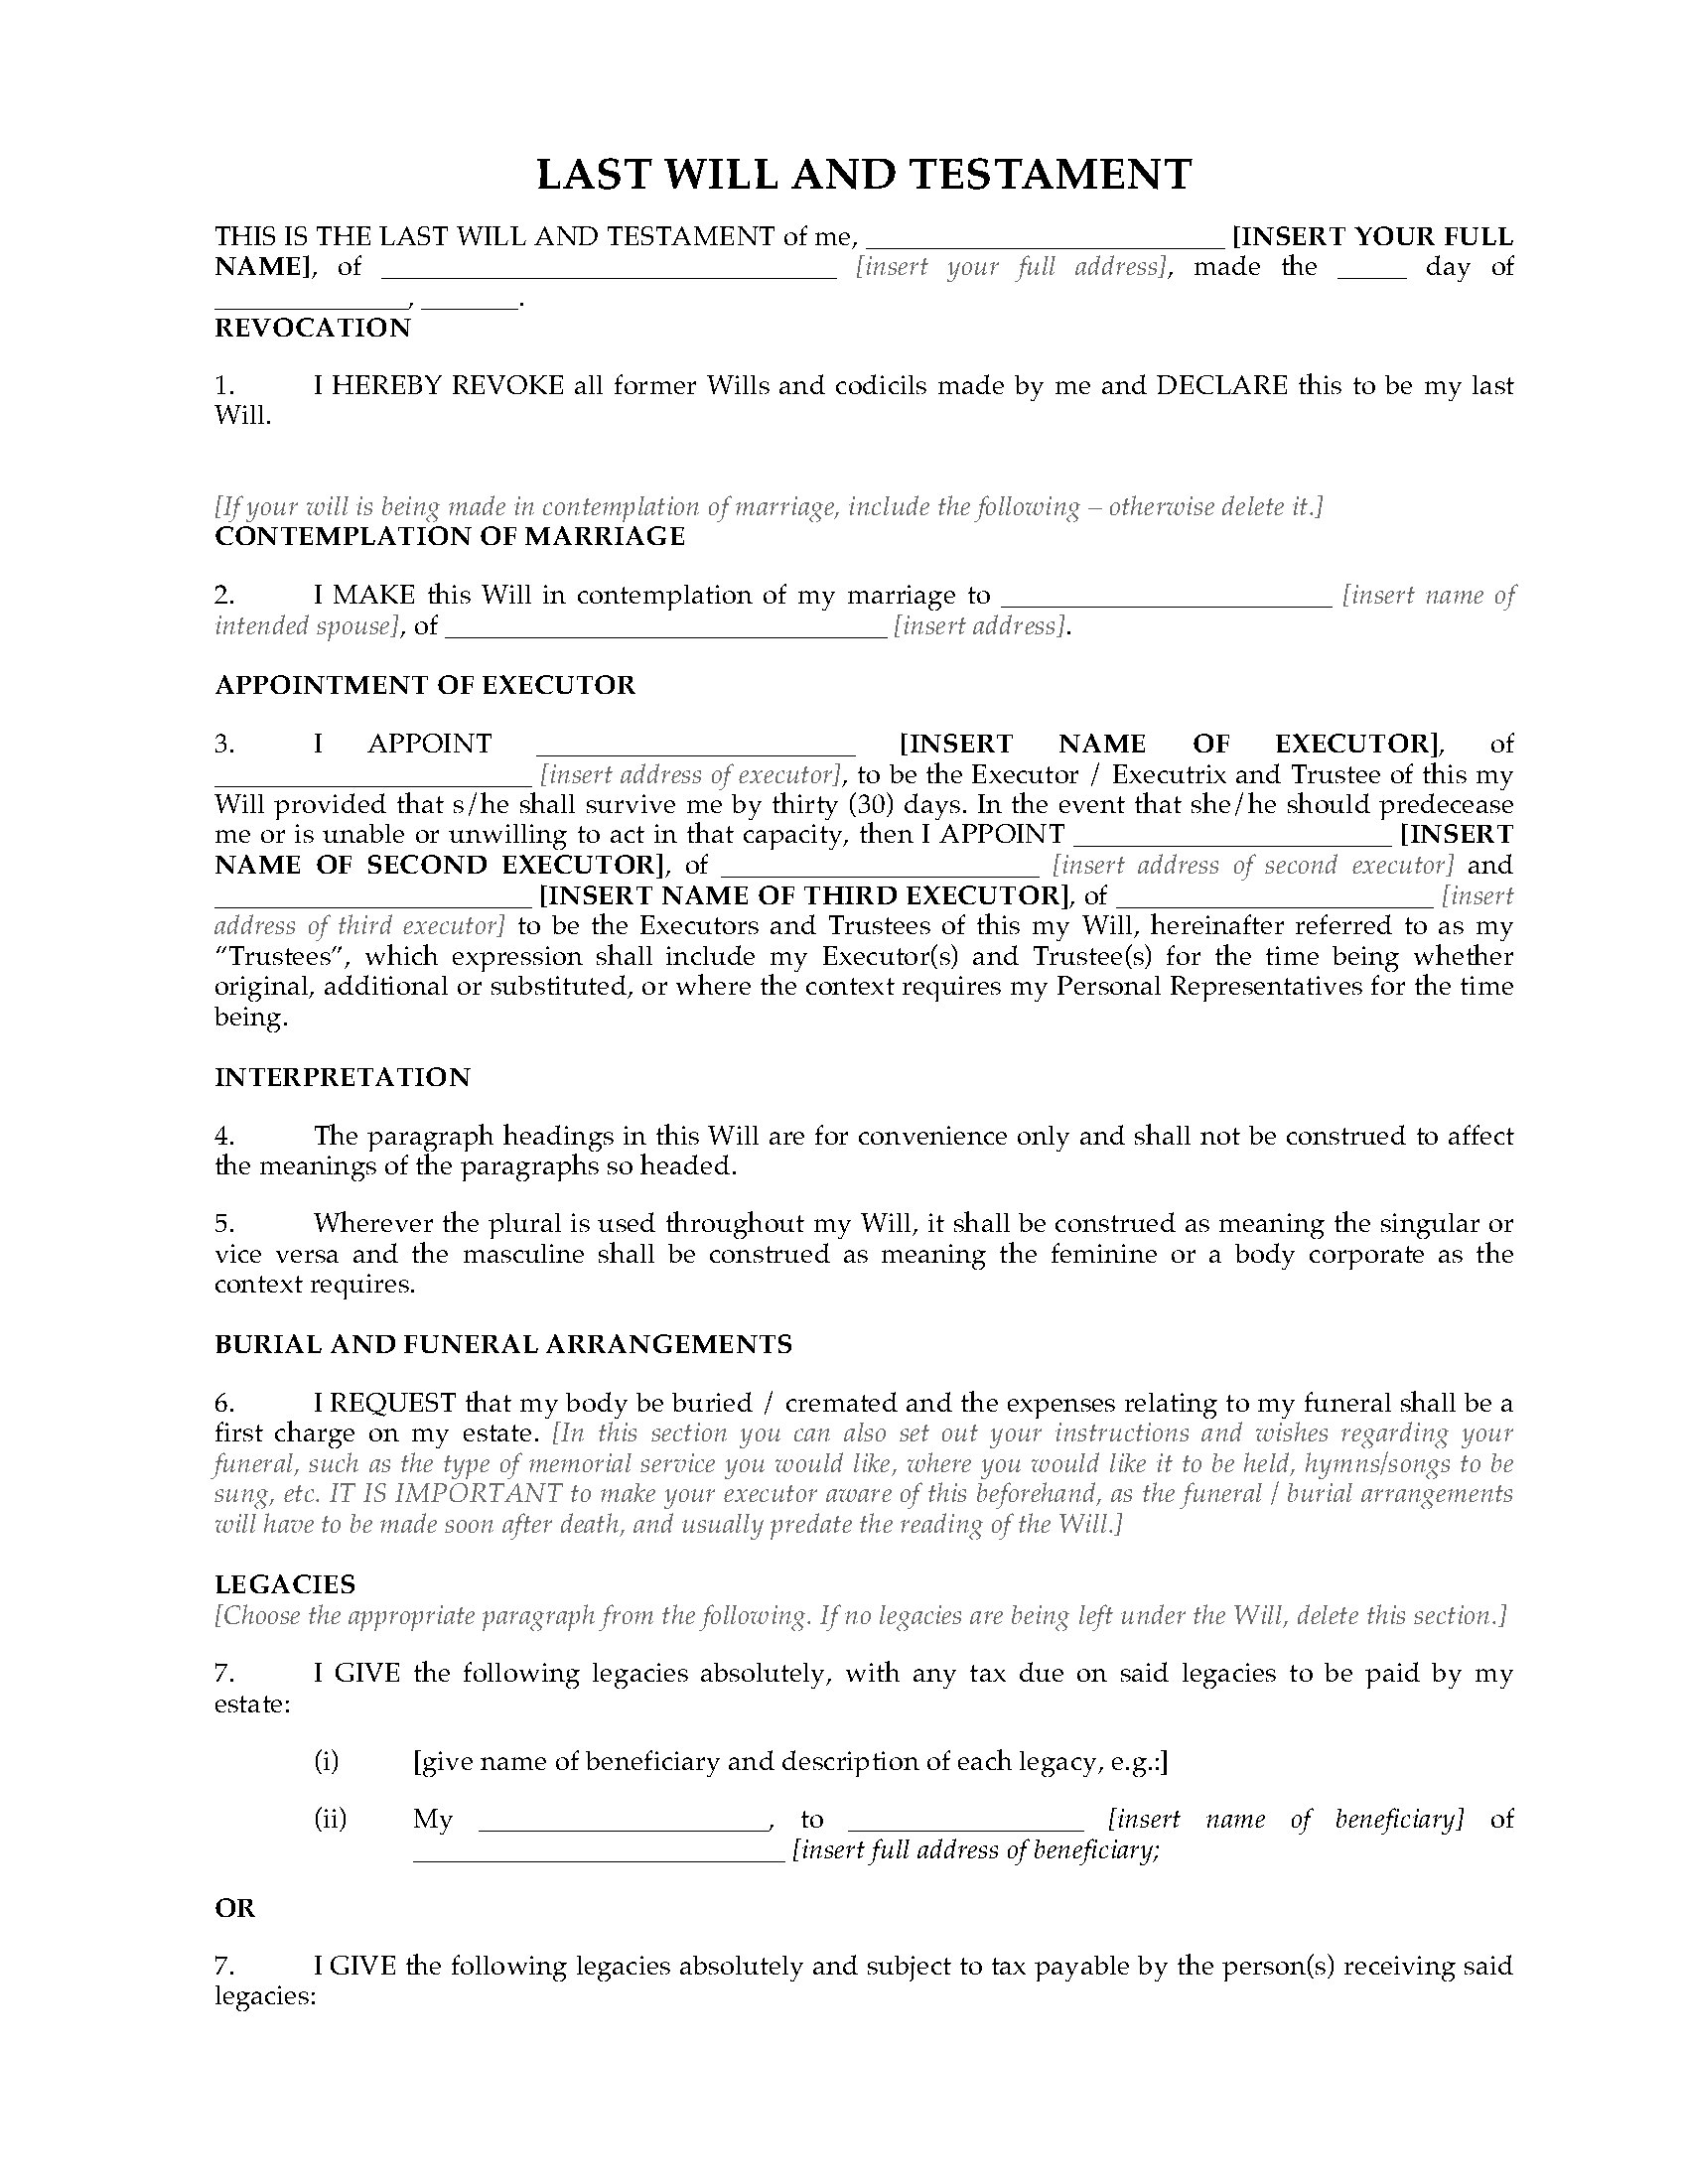 United Kingdom Legal Will Kit | Legal Forms and Business Templates ...